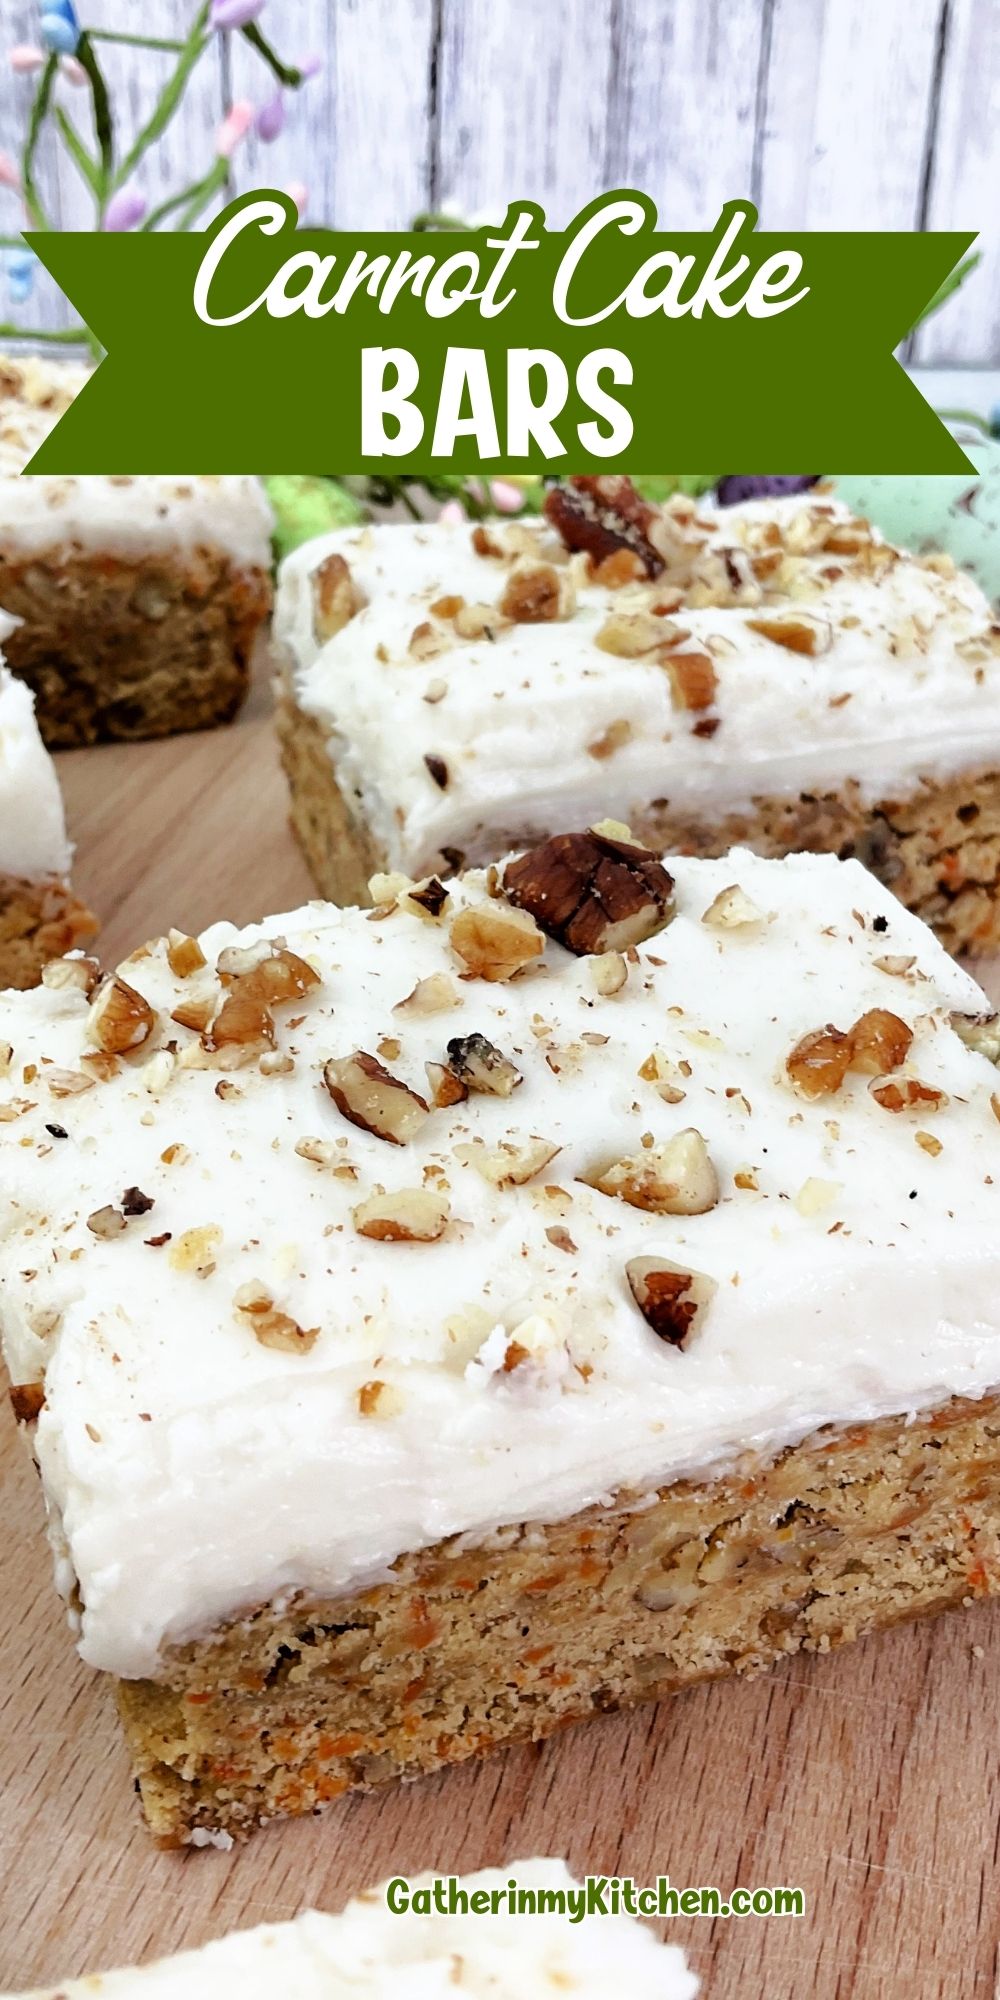 Pin image: carrot cake bar on bottom with the words "Carrot Cake Bars" on top.